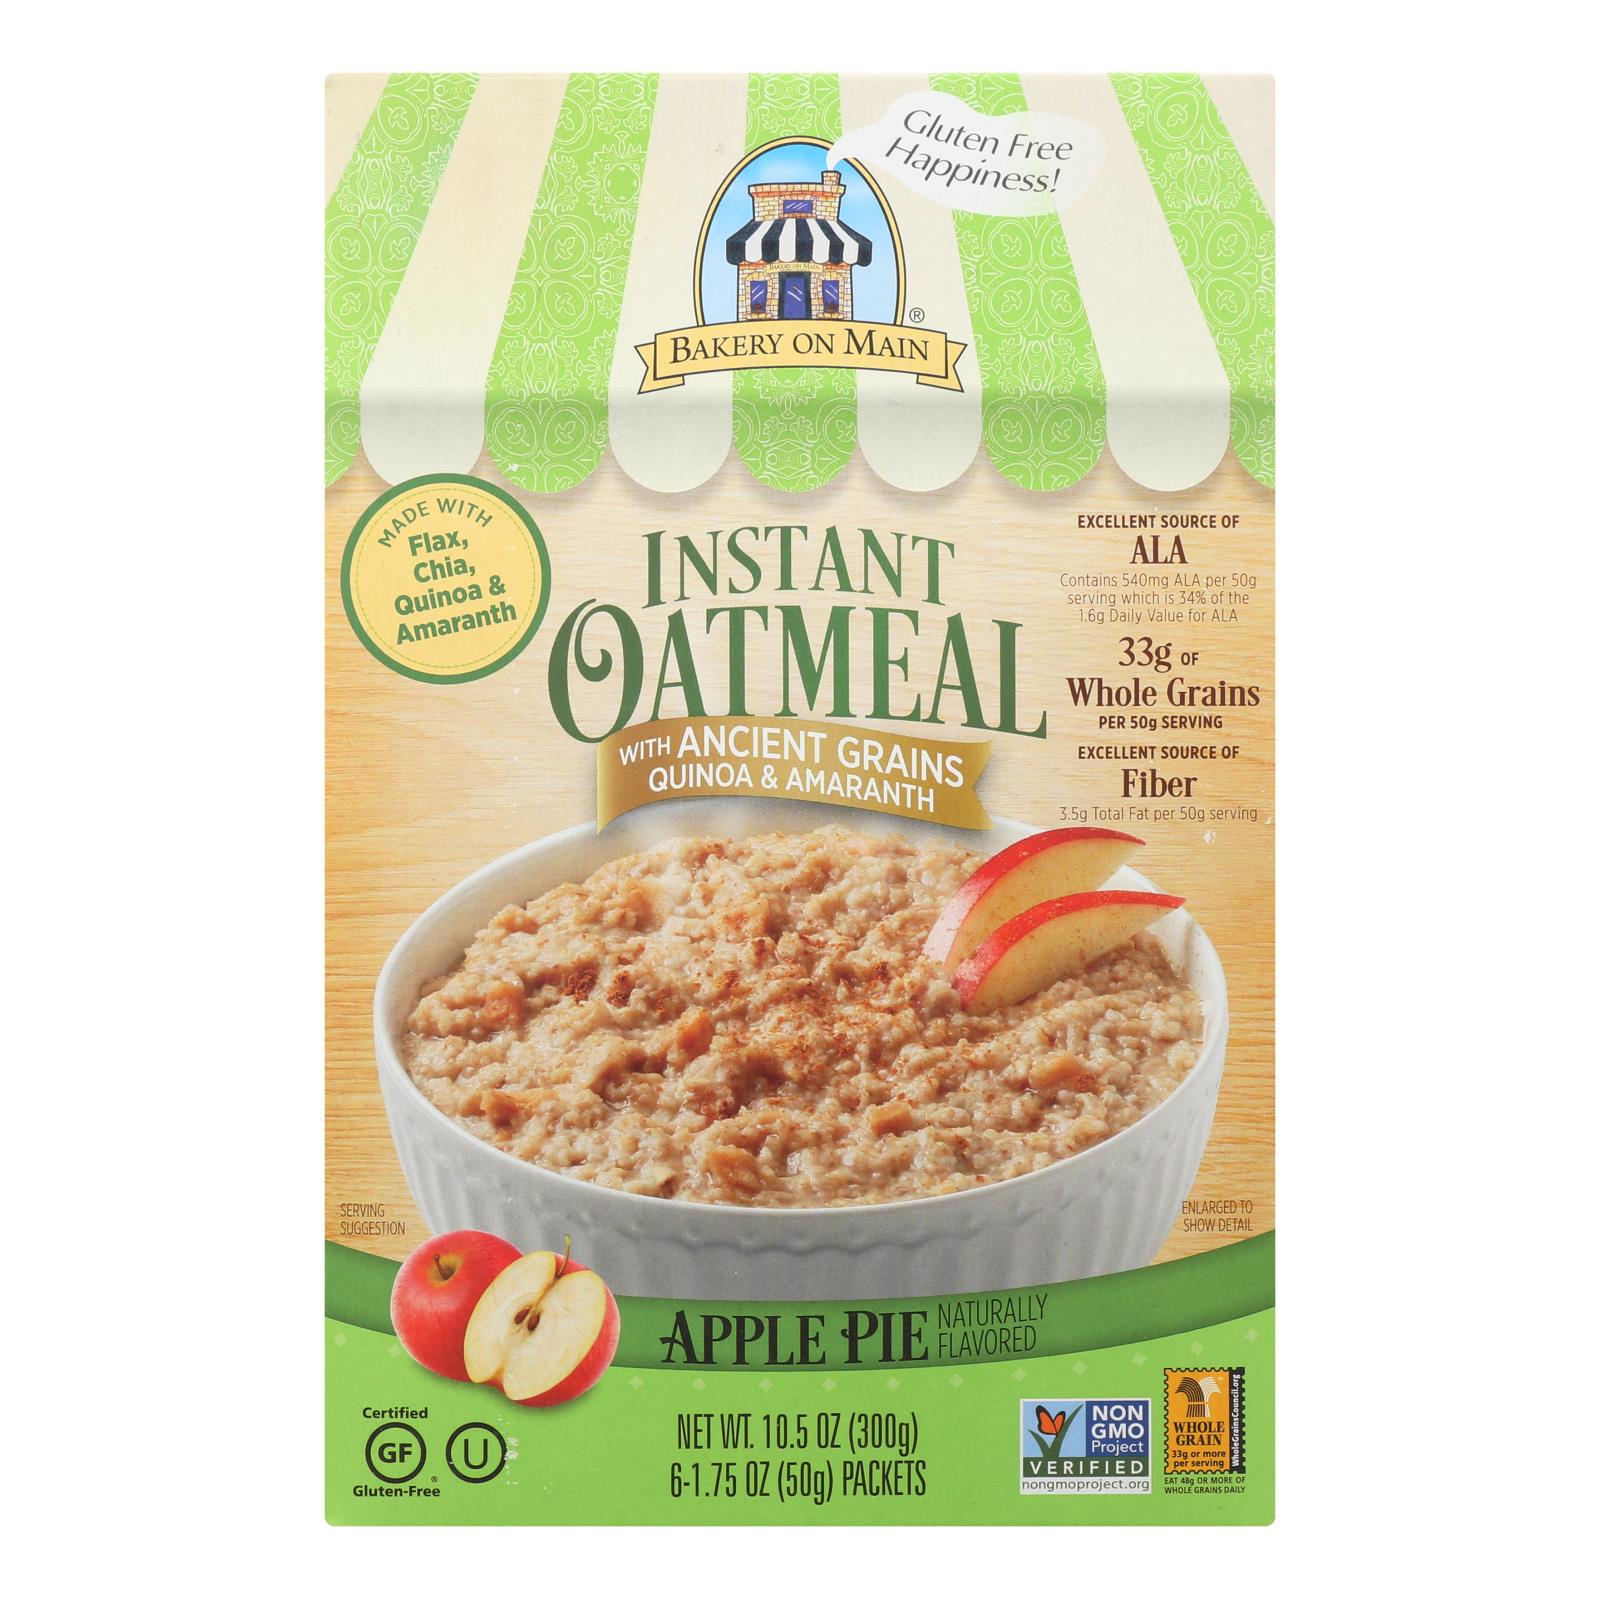 Bakery On Main, Bakery On Main Oatmeal Apple Pie - Case of 6 - 10.5 oz. (Pack of 6)